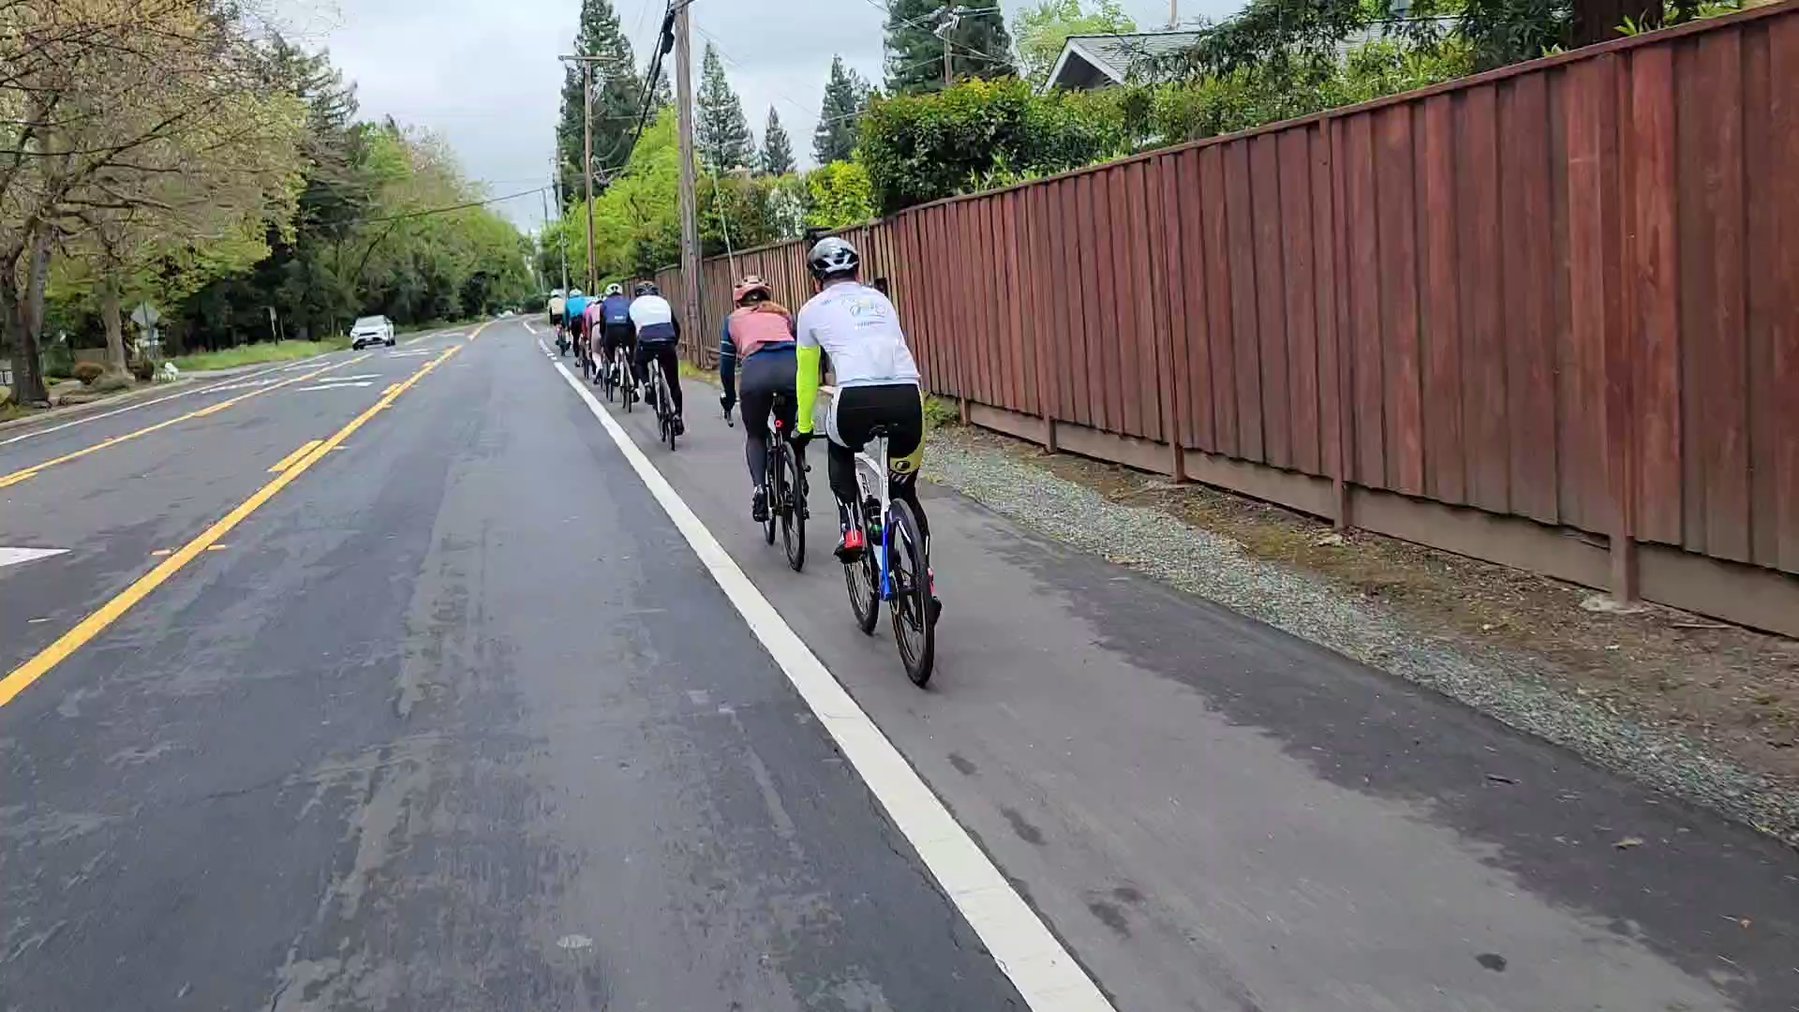 Unknown group ride